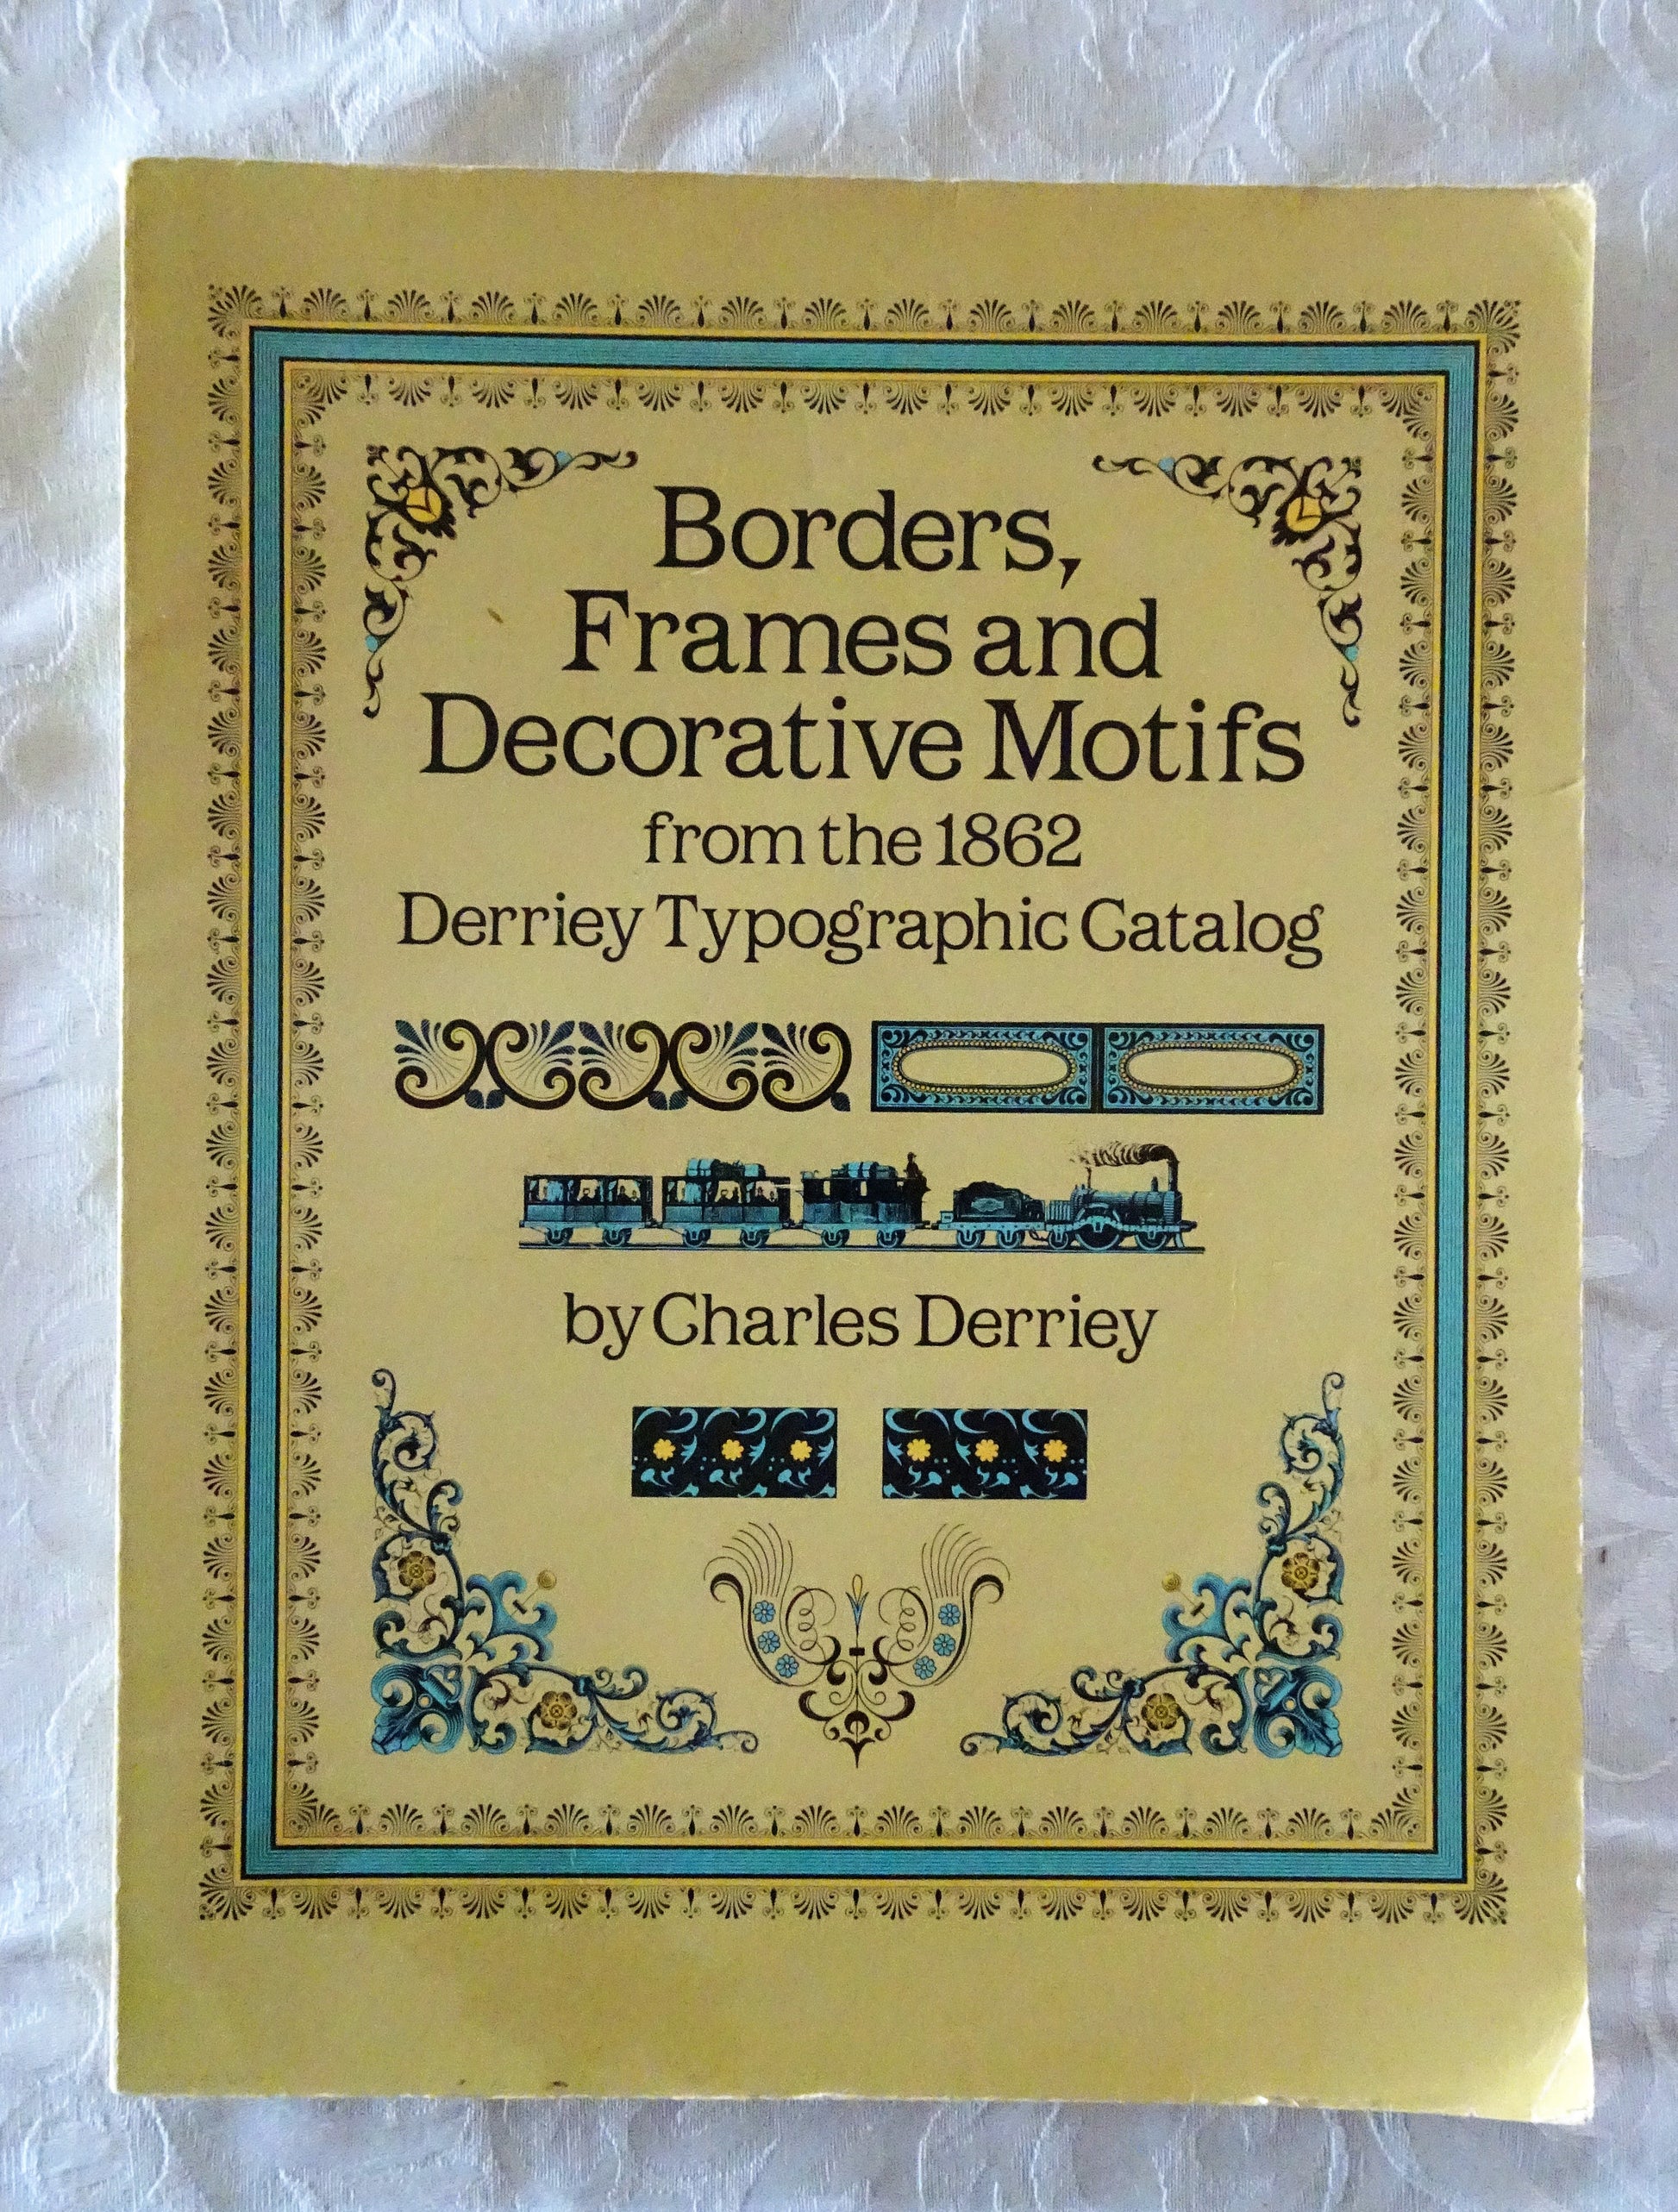 Borders, Frames and Decorative Motifs  from the 1862 Derriey Typographic Catalog  by Charles Derriey